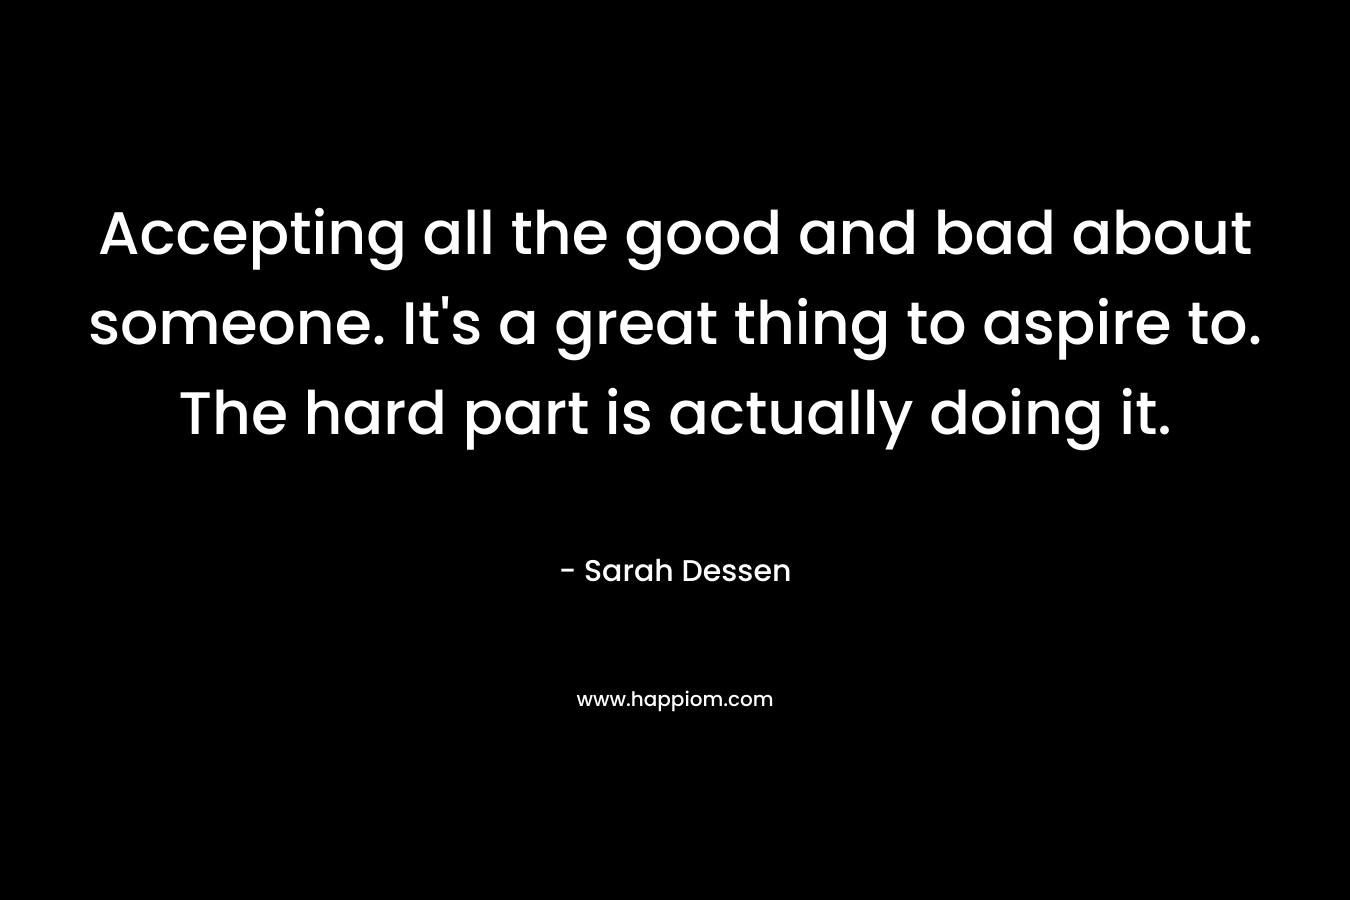 Accepting all the good and bad about someone. It's a great thing to aspire to. The hard part is actually doing it.